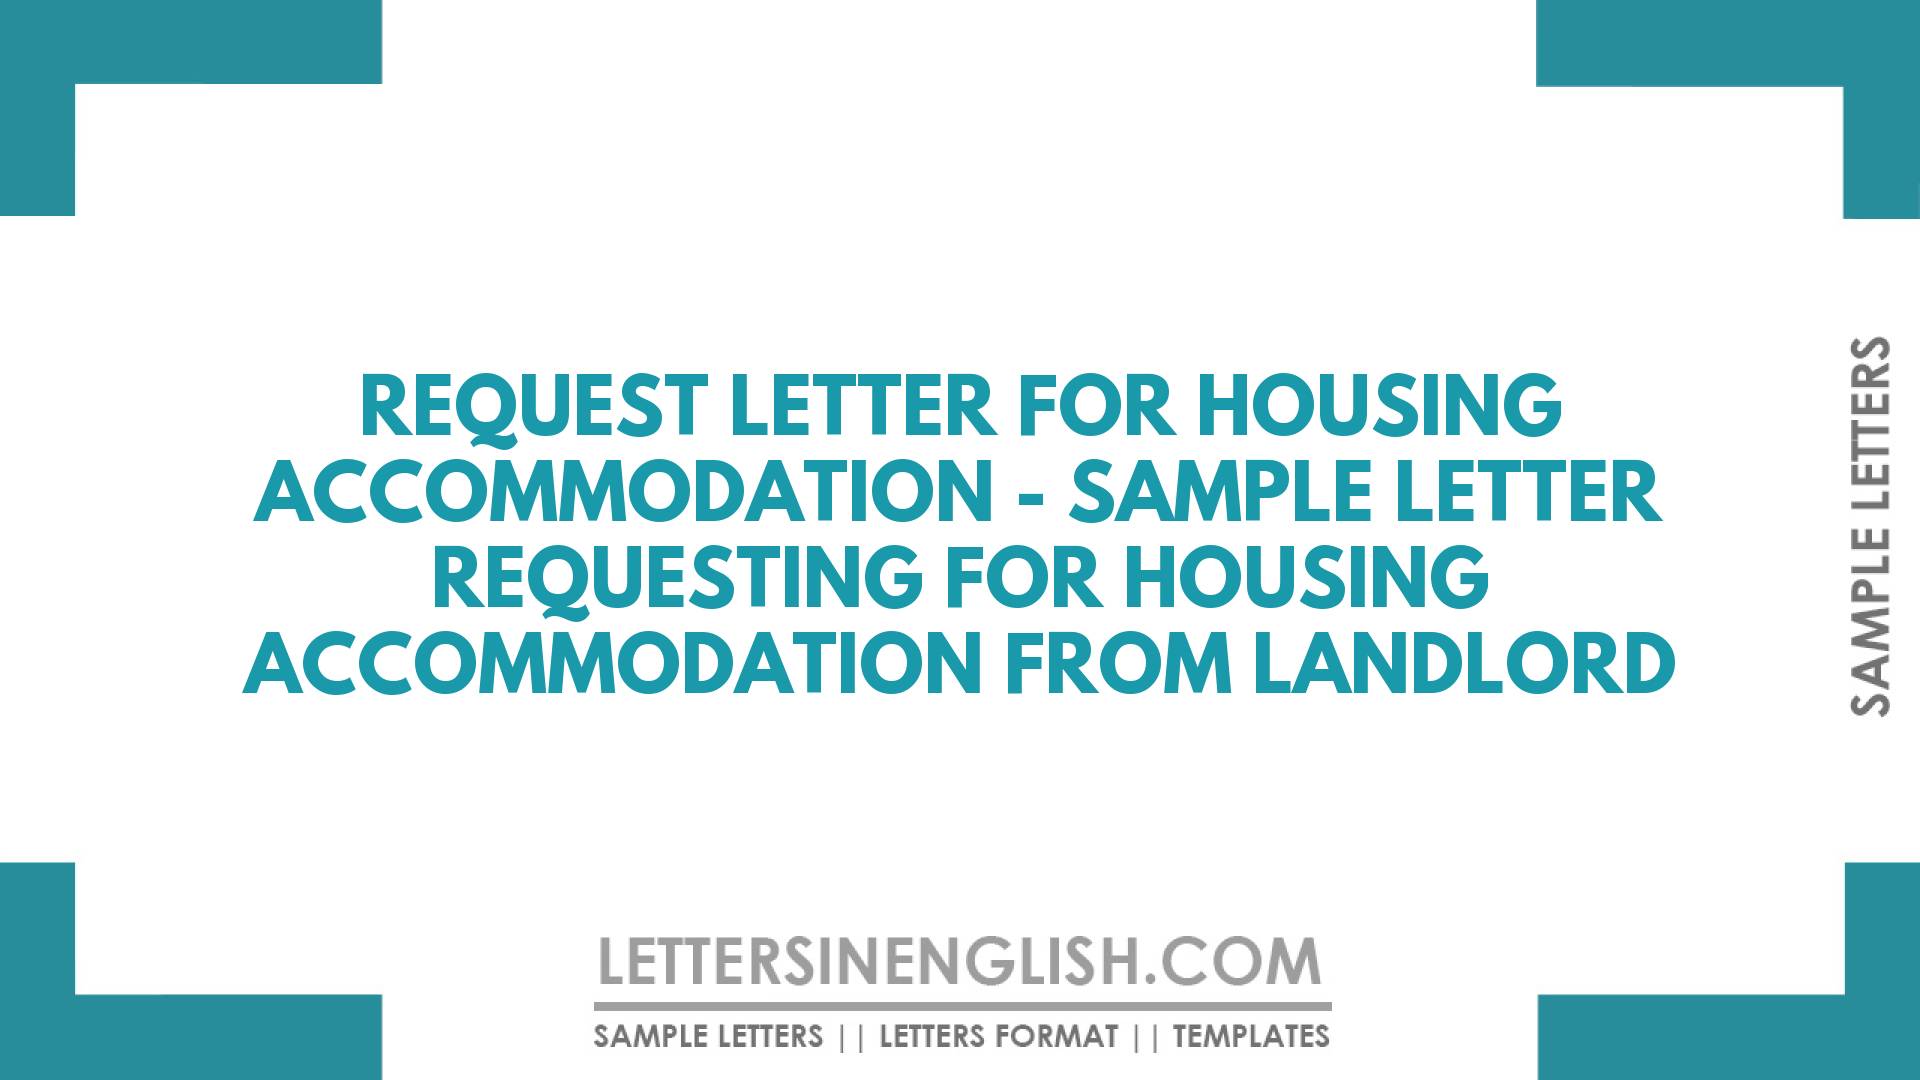 Request Letter for Housing Accommodation – Sample Letter Requesting for Housing Accommodation from Landlord